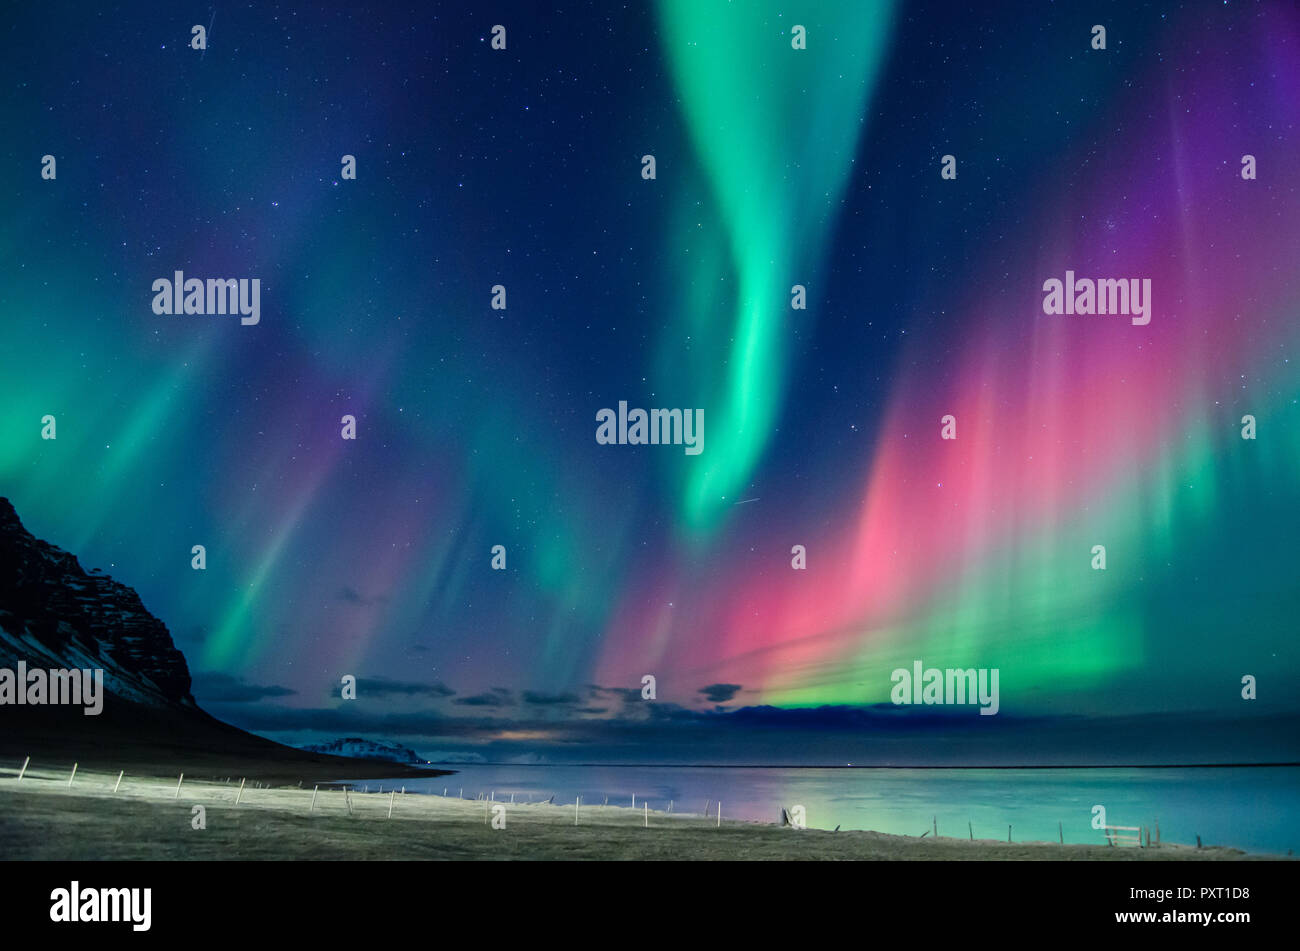 Colorful Northern Lights Aurora Borealis With Green Blue Purple Red Flames Over A Beach In The South Of Iceland With A Mountain On The Back Stock Photo Alamy